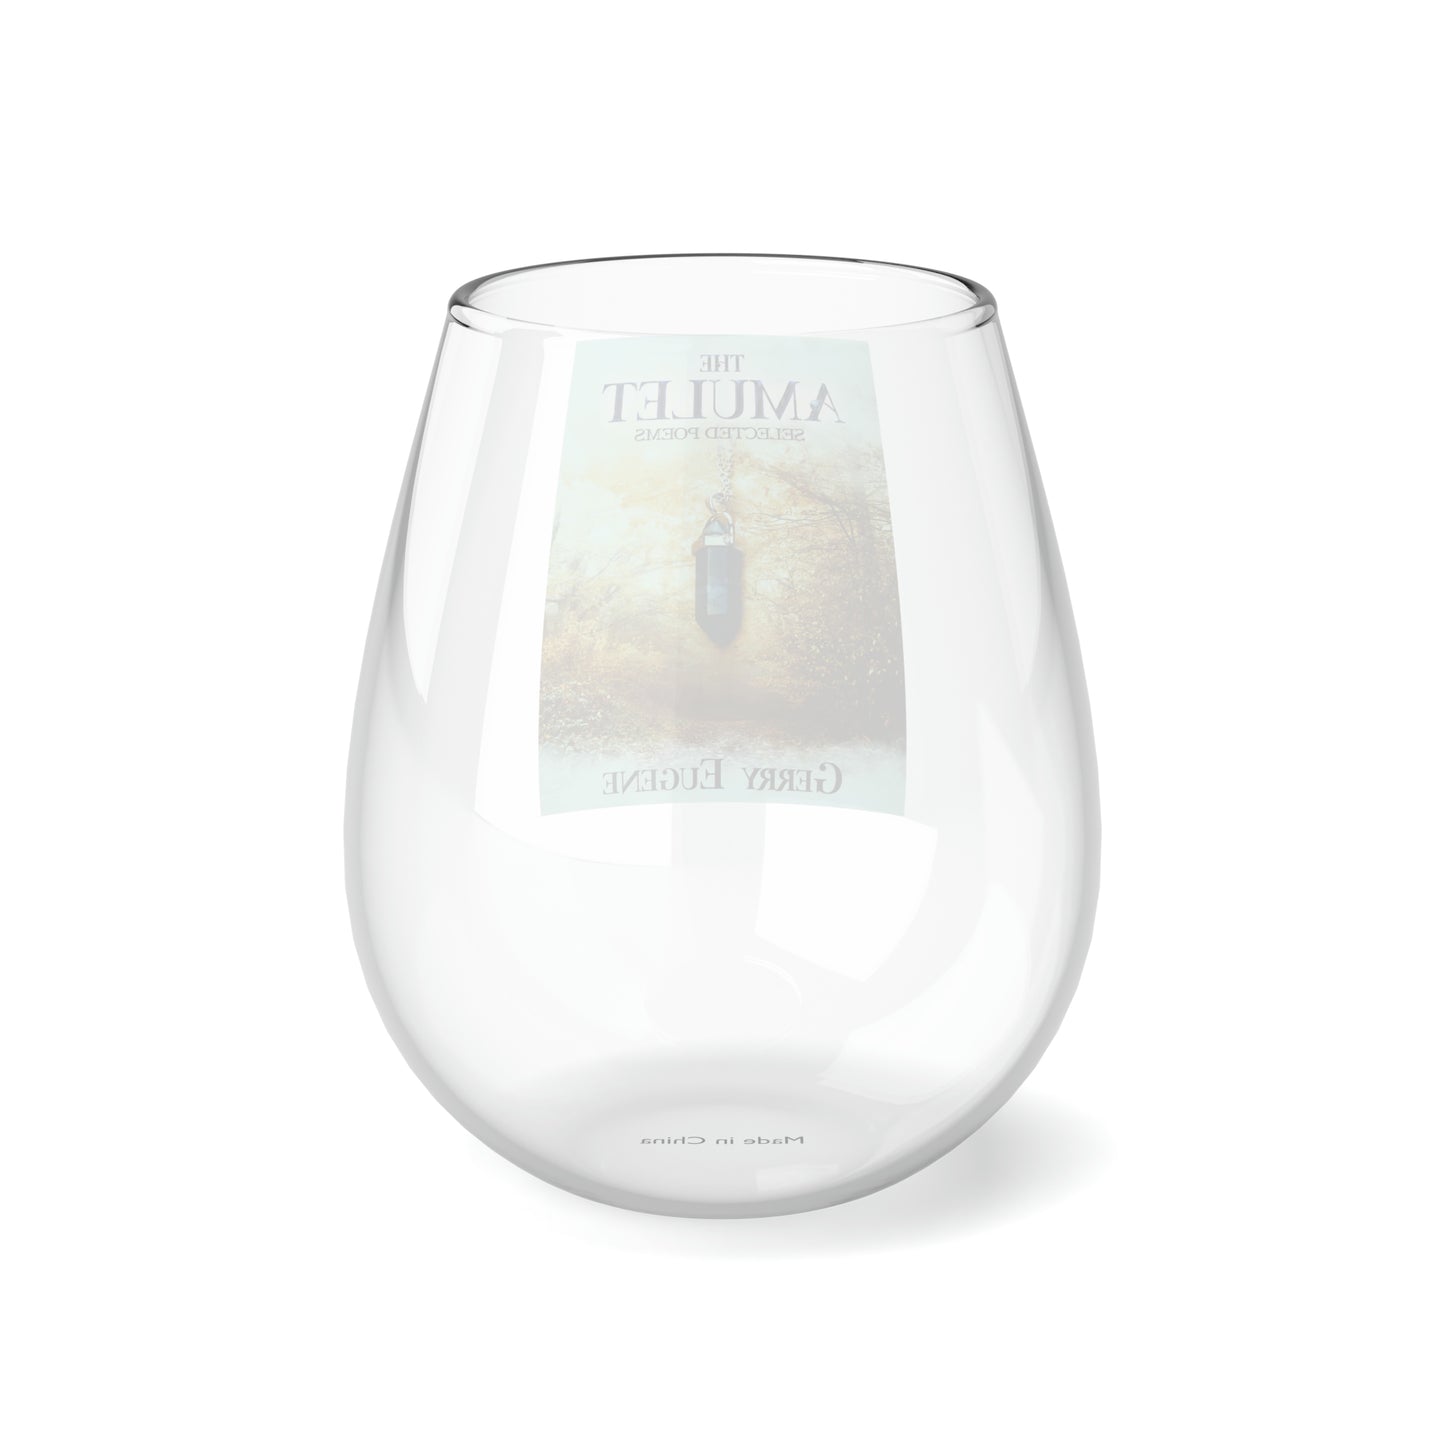 The Amulet - Stemless Wine Glass, 11.75oz